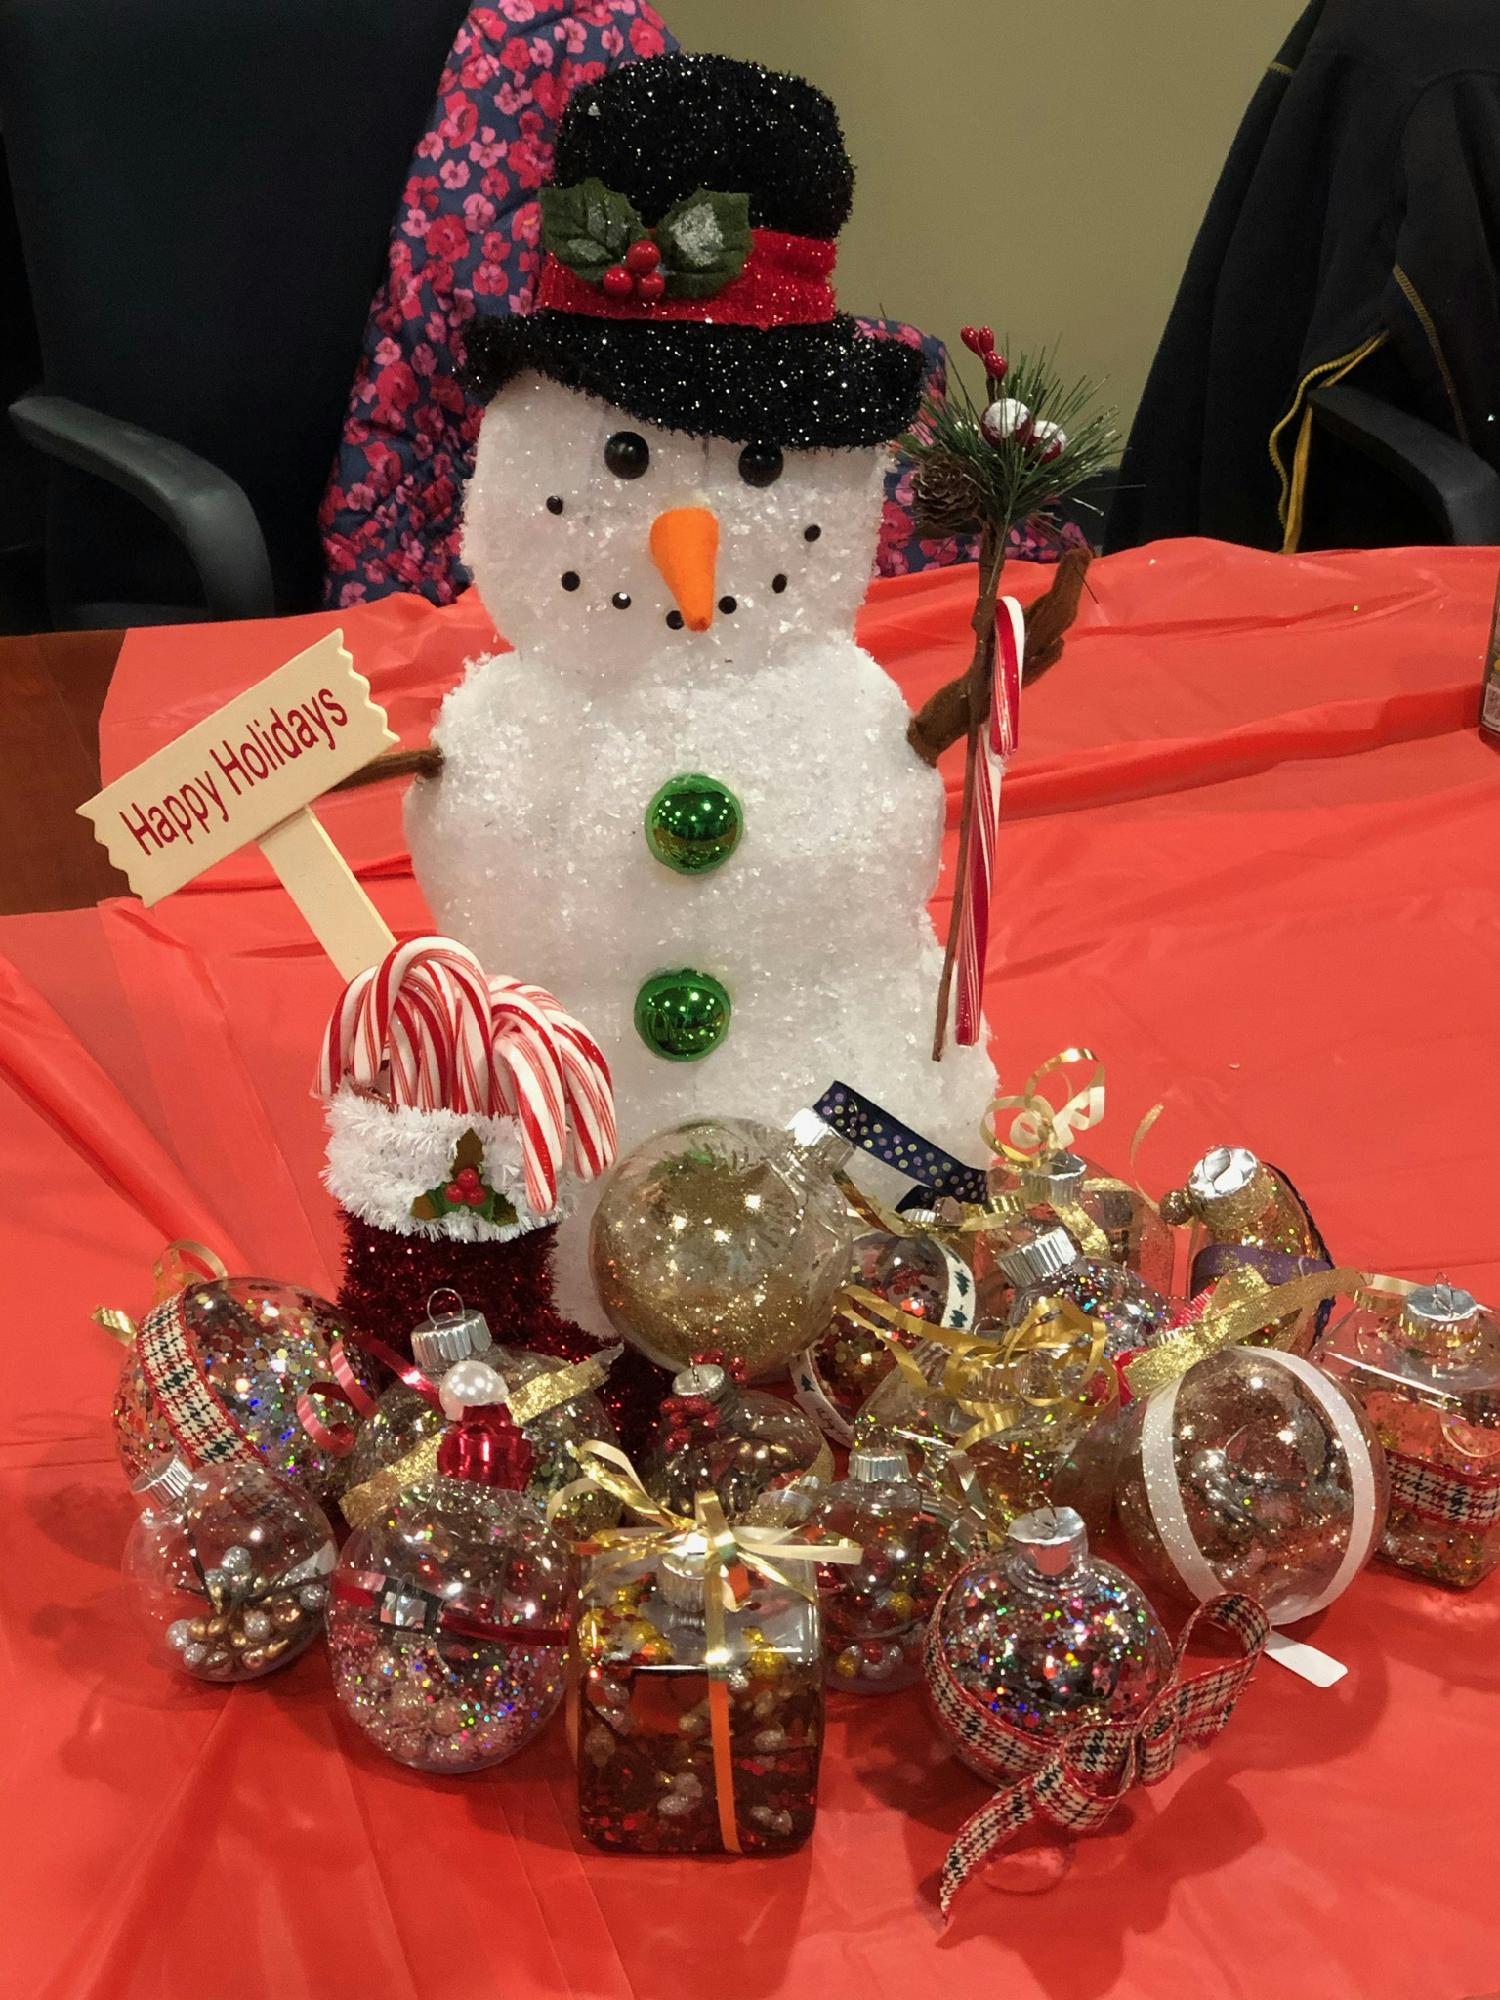 Ornaments made by Anova staff and families